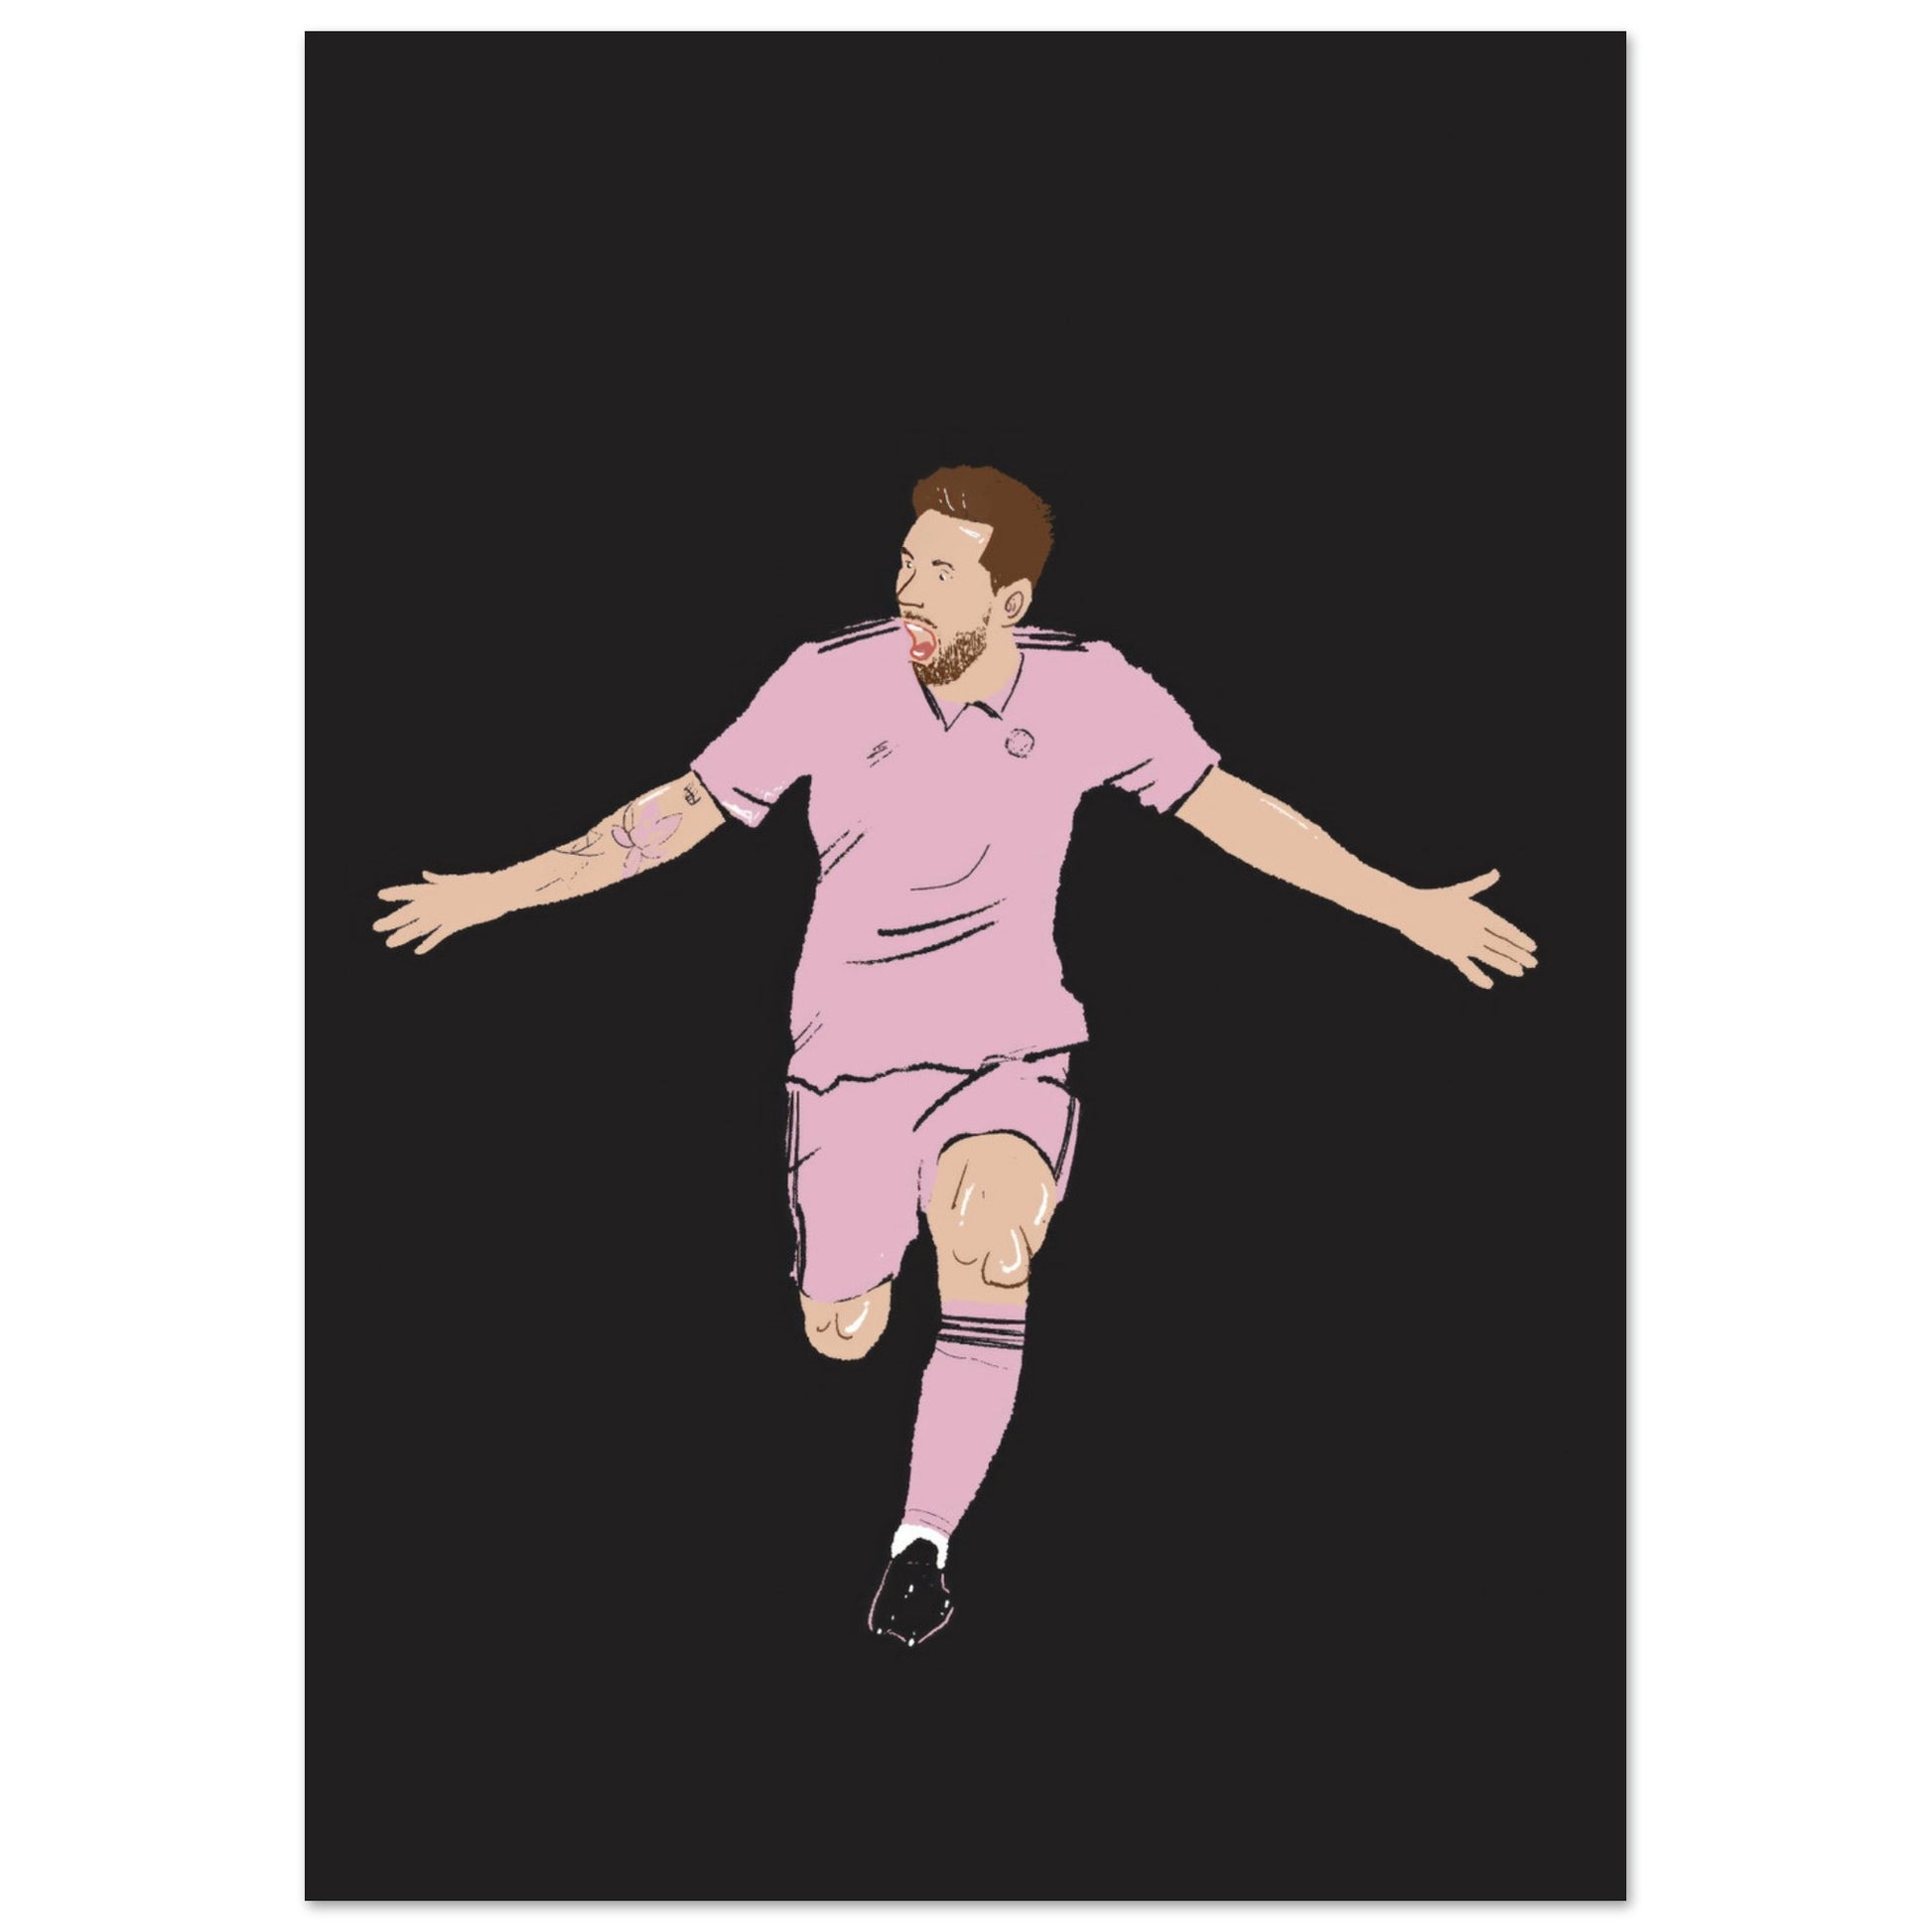 Graphic print of football icon Lionel Messi in action, donning Inter Miami's distinctive pink jersey against a contrasting black background. 